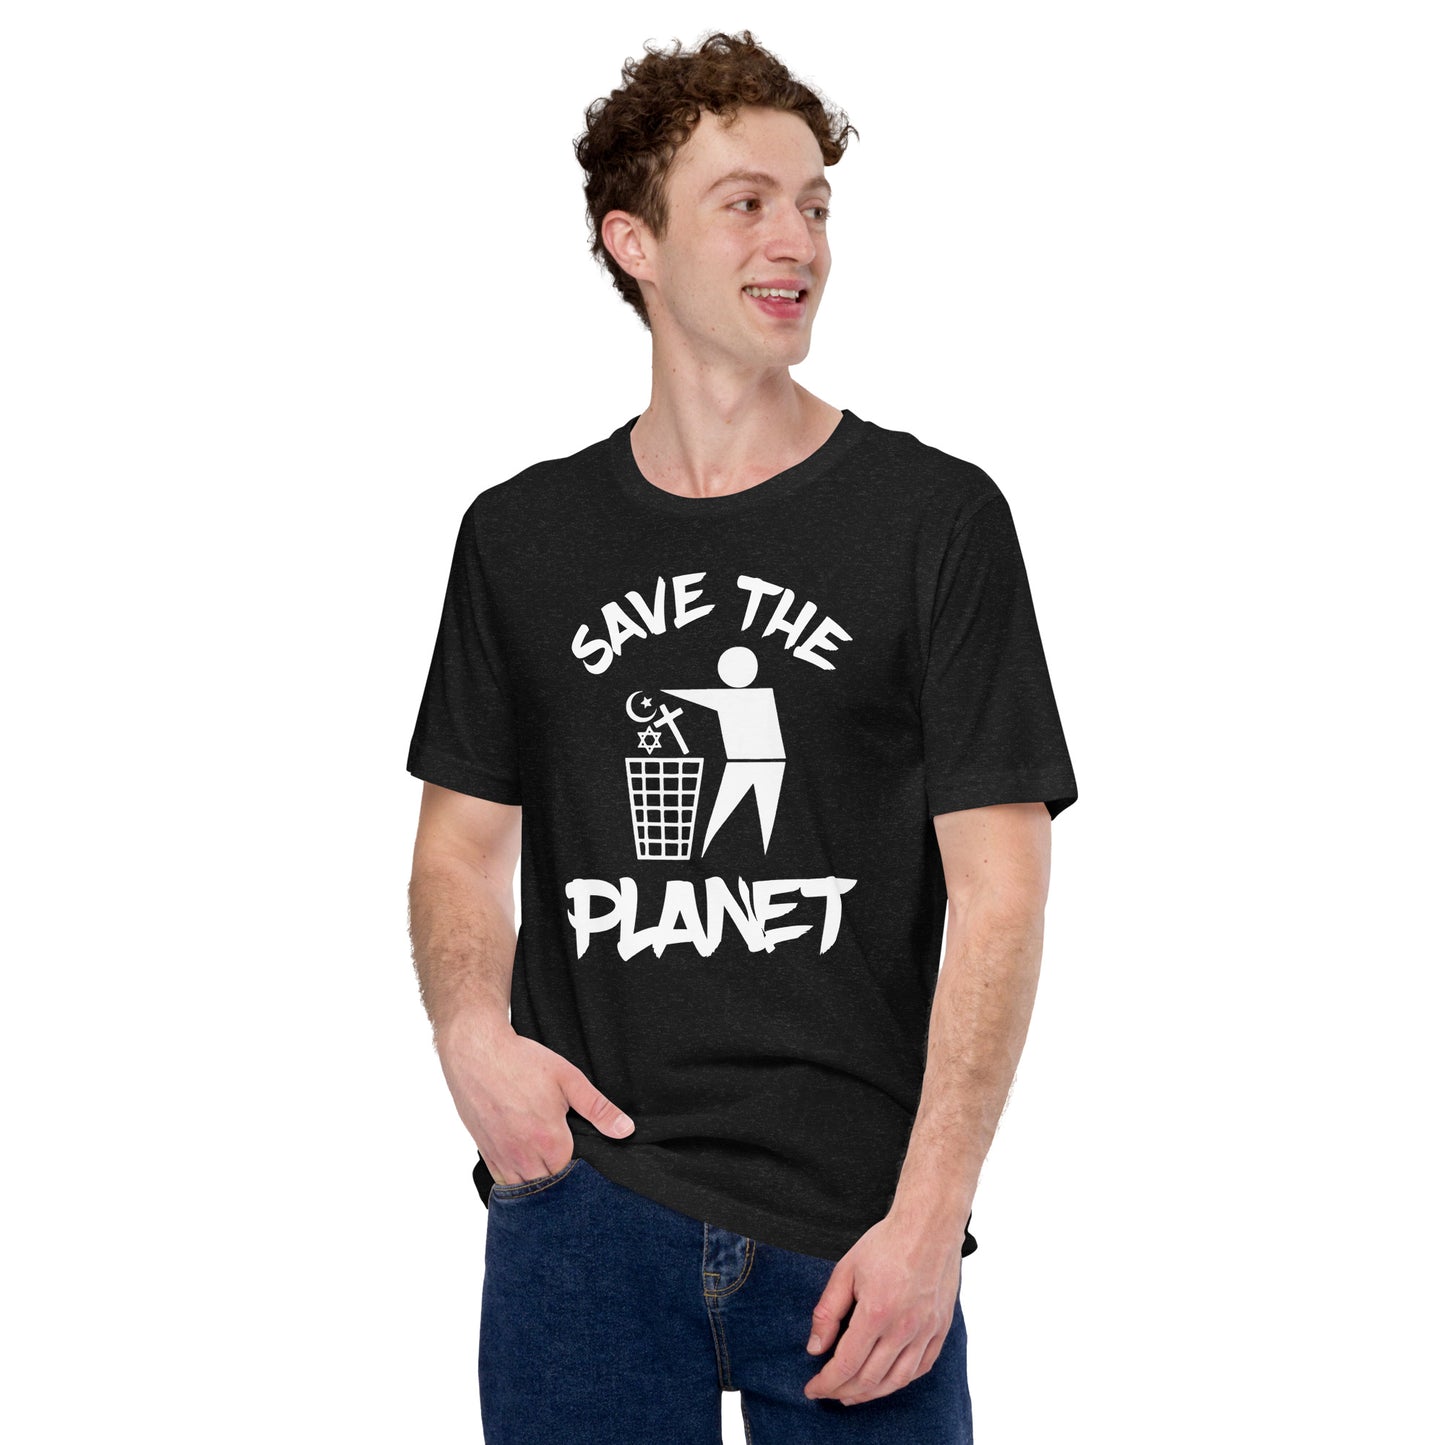 Save the Planet Unisex t-shirt,